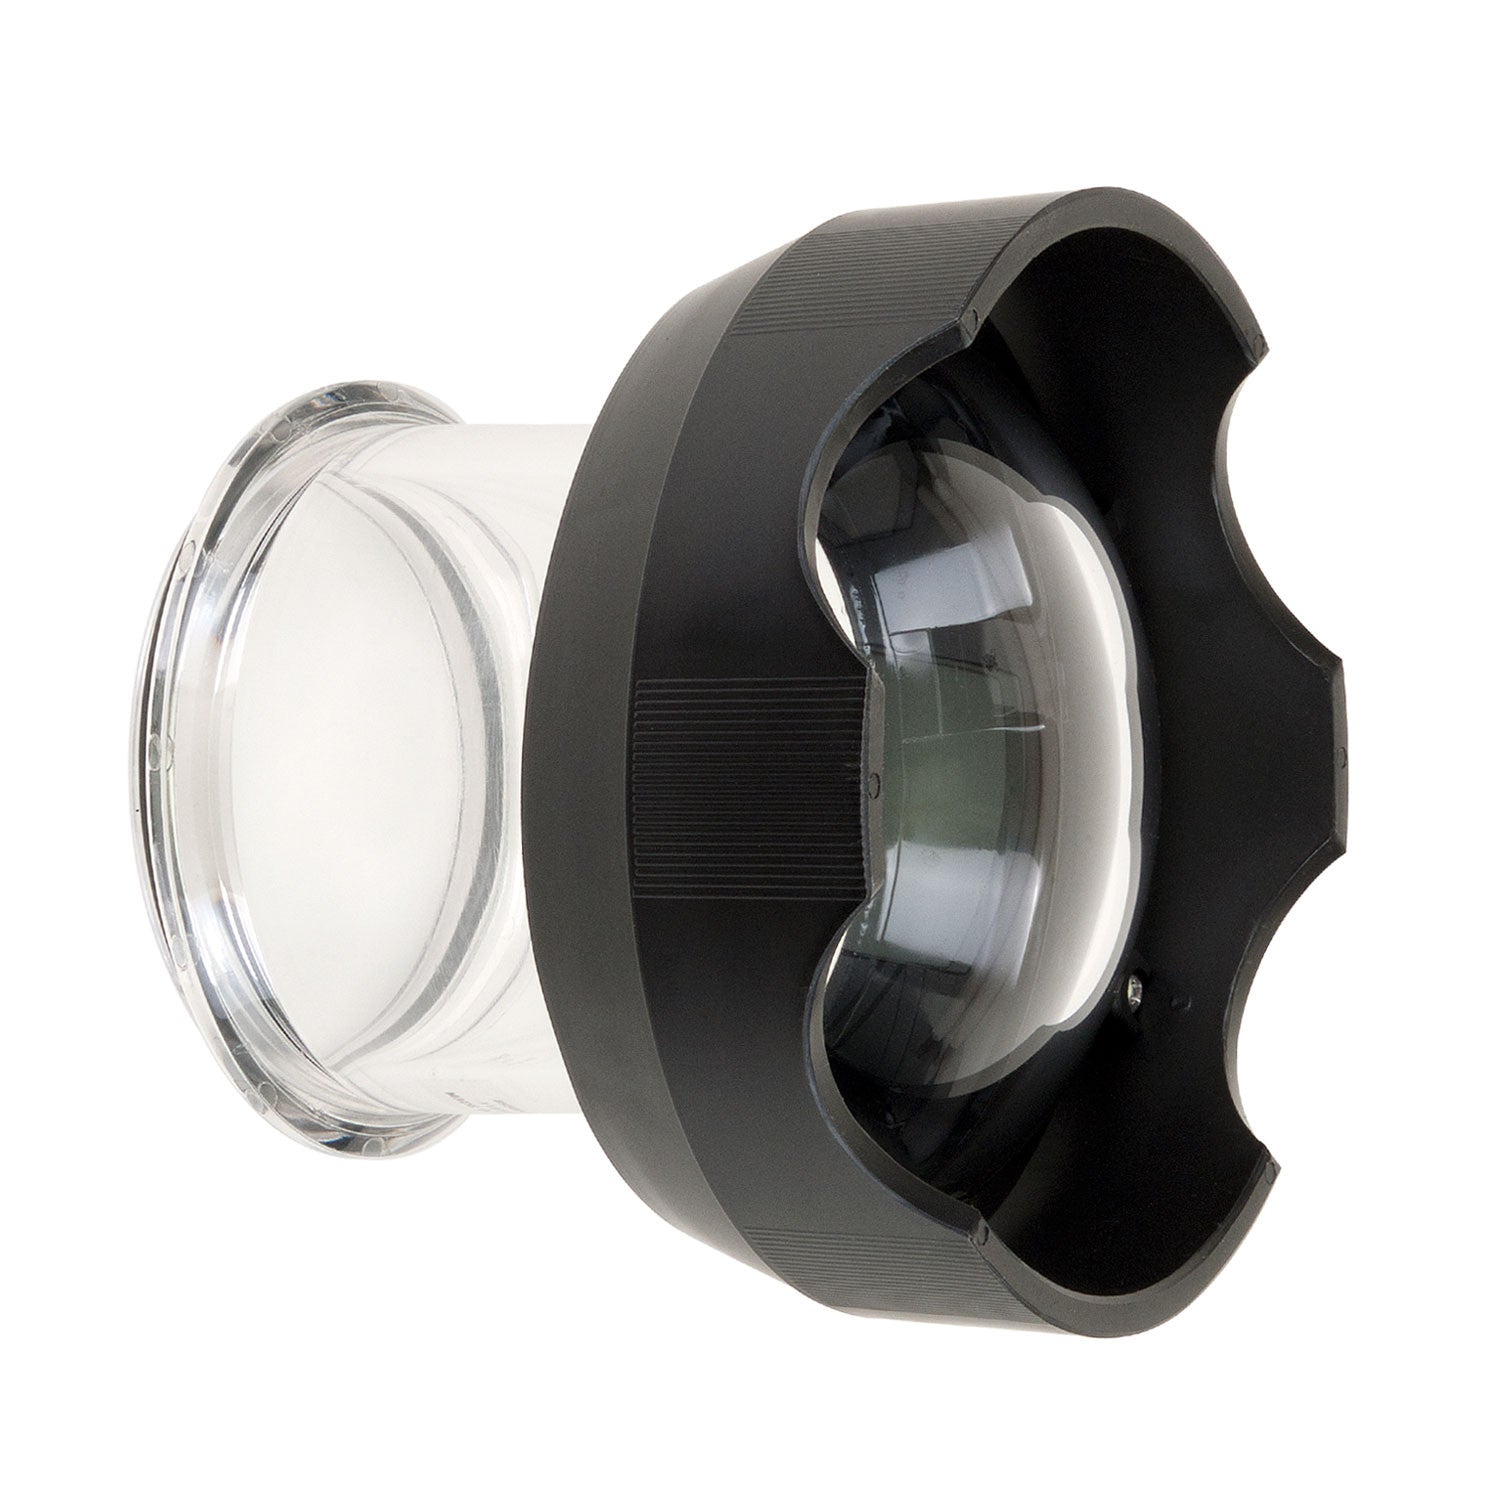 FL 6 inch Dome for Lenses Up To 5 Inches